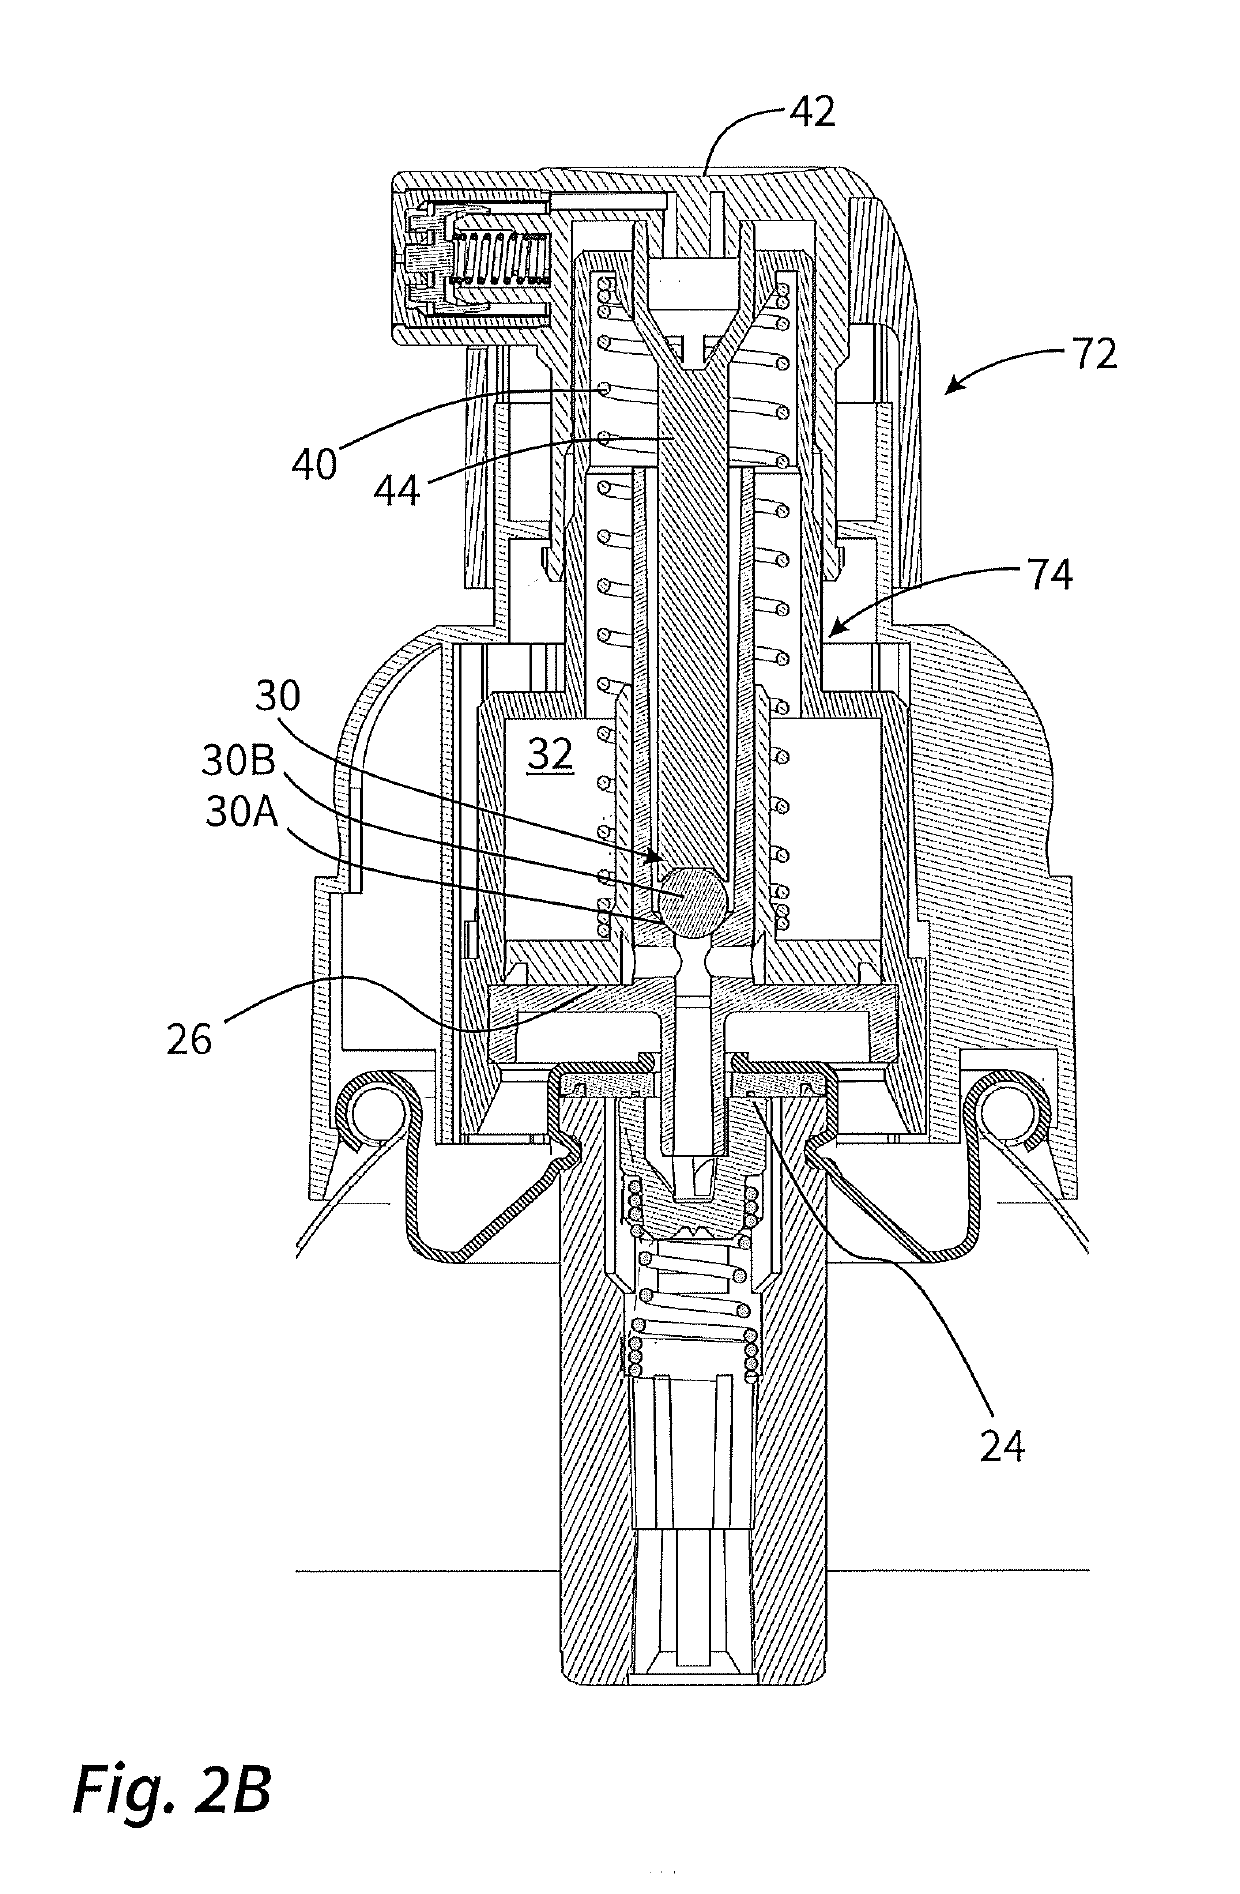 Dispenser for discharging liquids, and operating method therefor